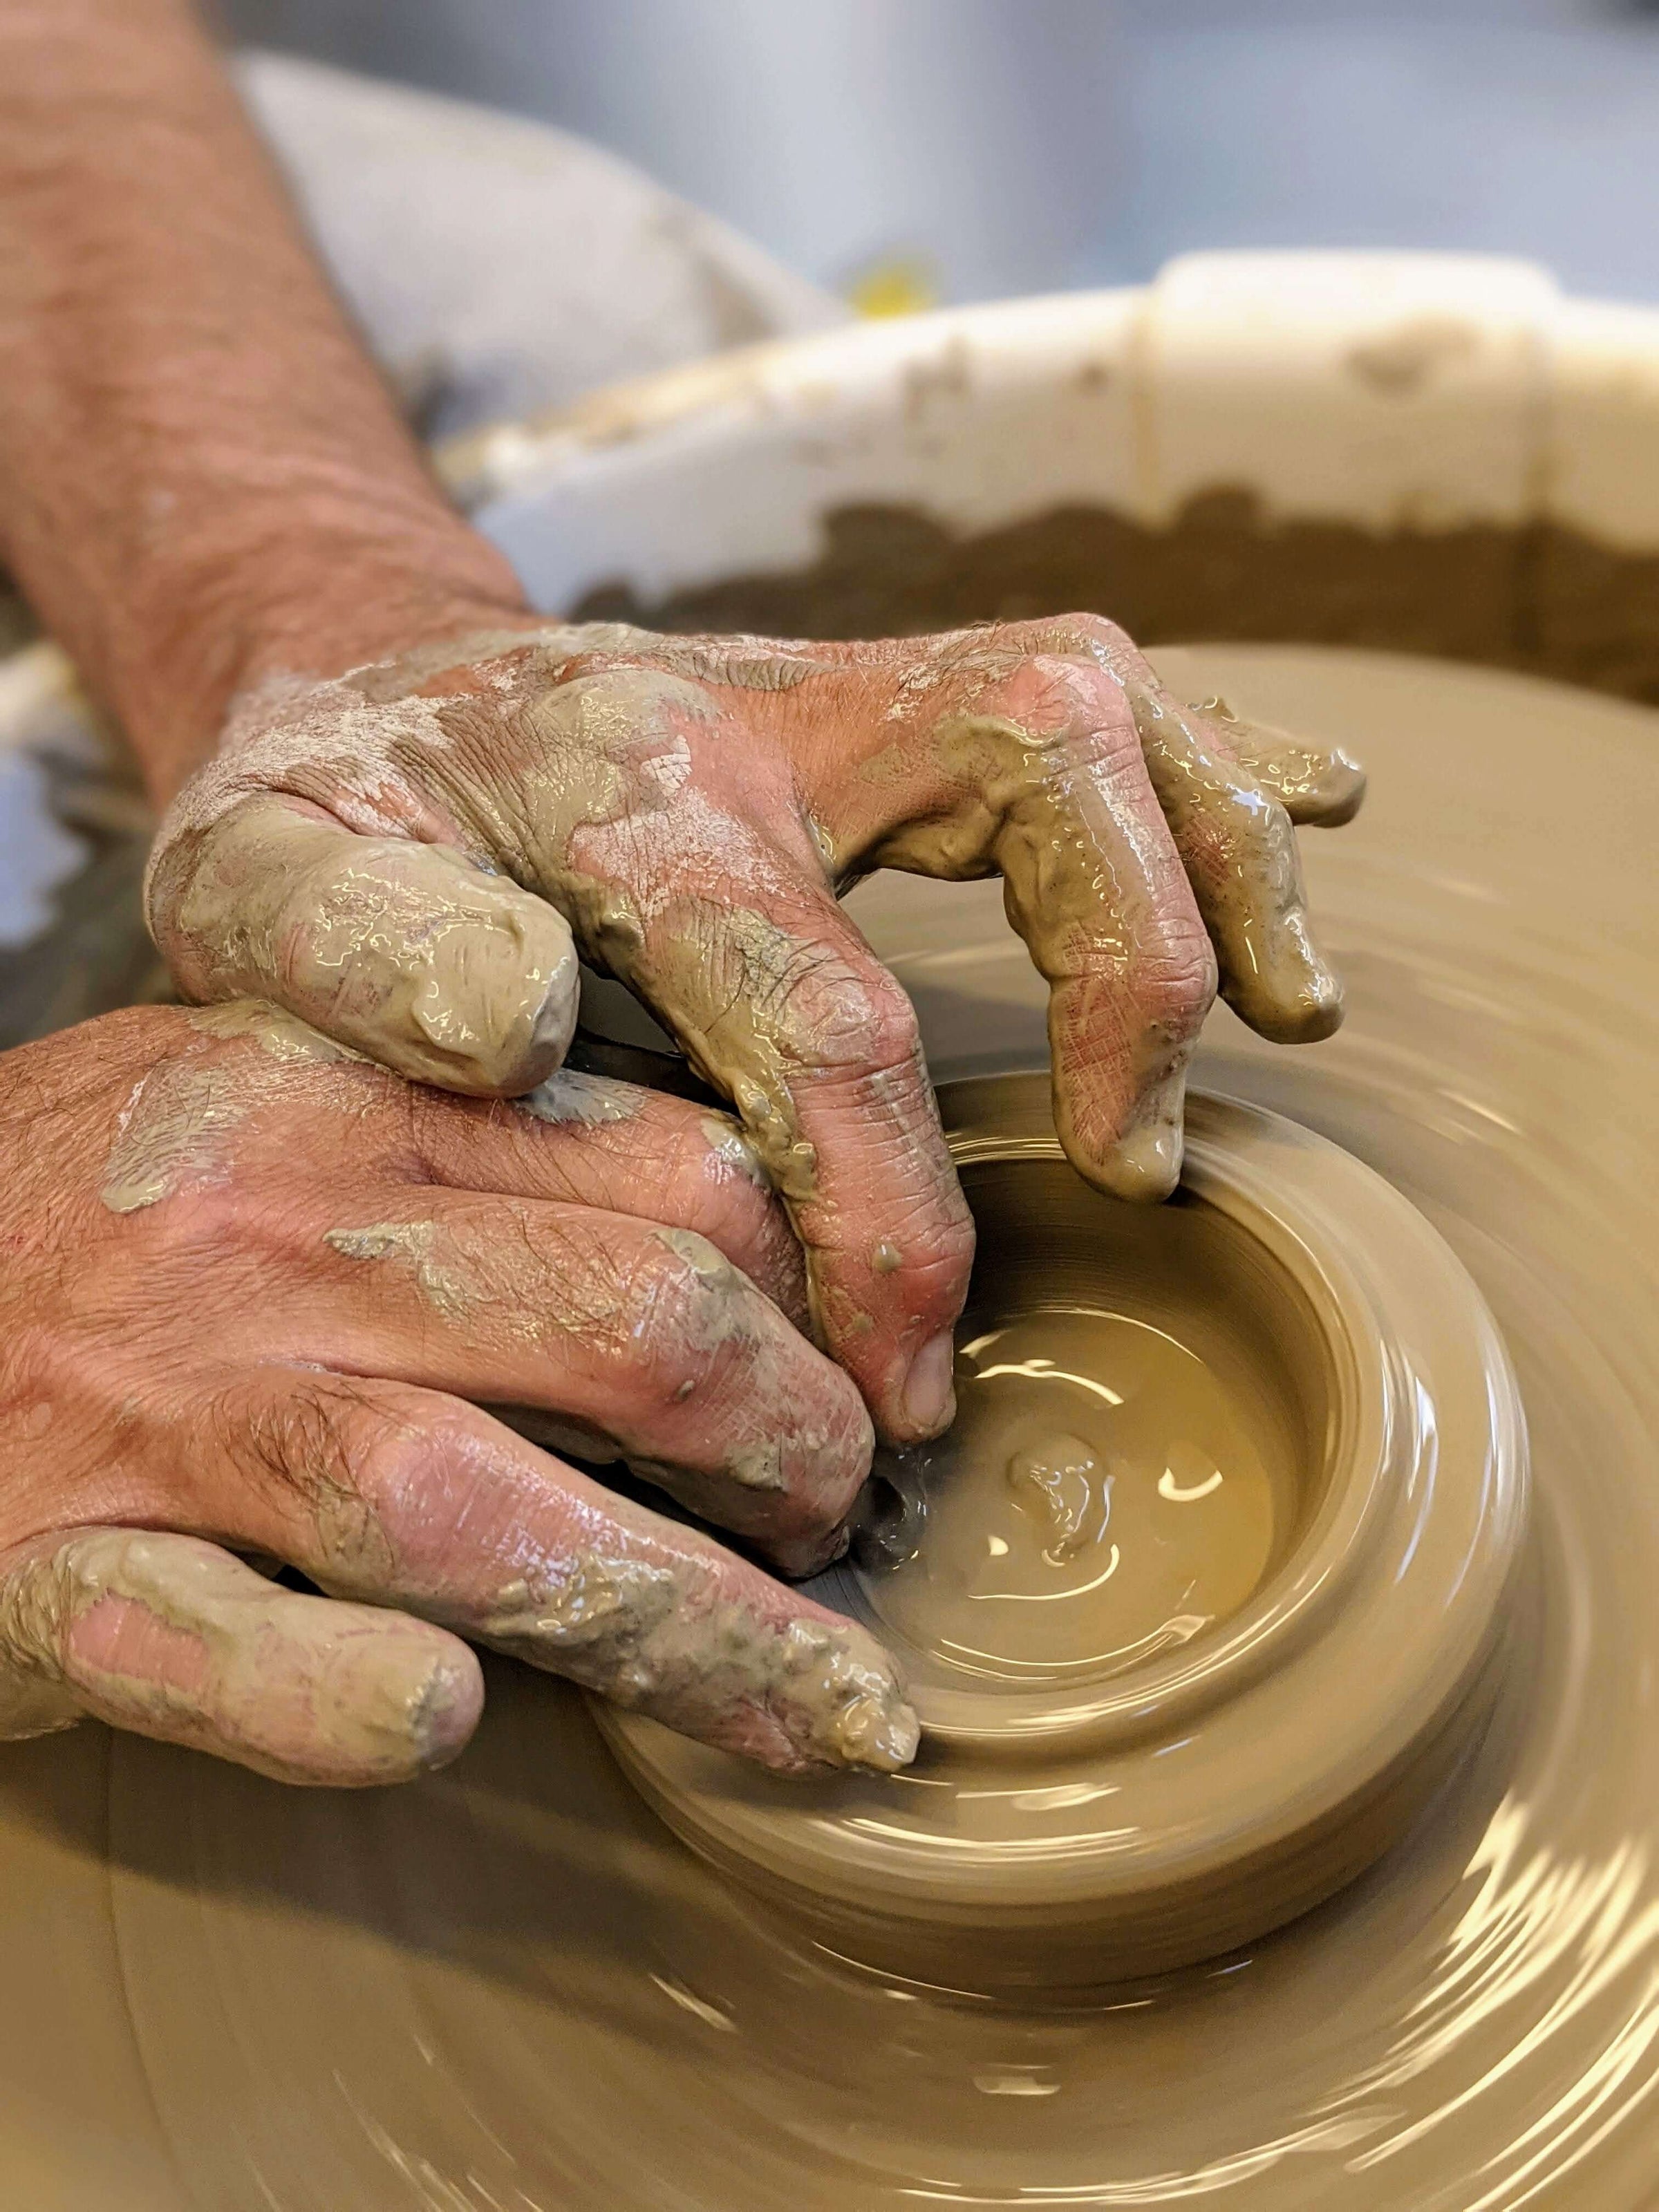 Pottery Wheel Classes - Hands On Art 4 Everyone